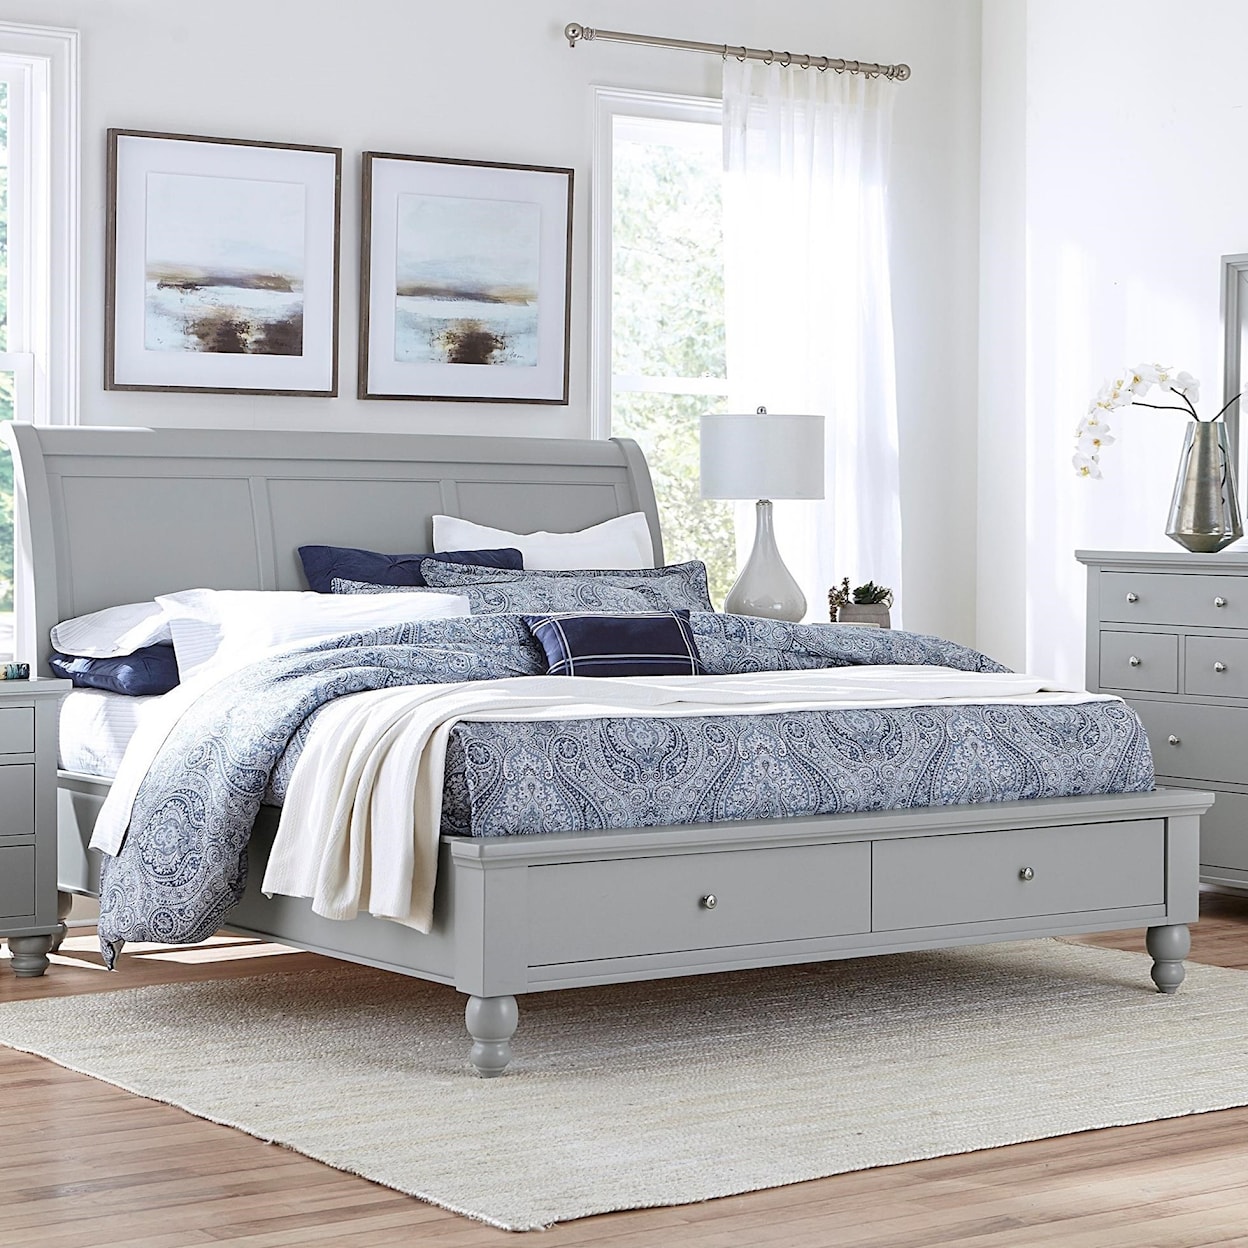 Aspenhome Cambridge CHY King Storage Sleigh Bed